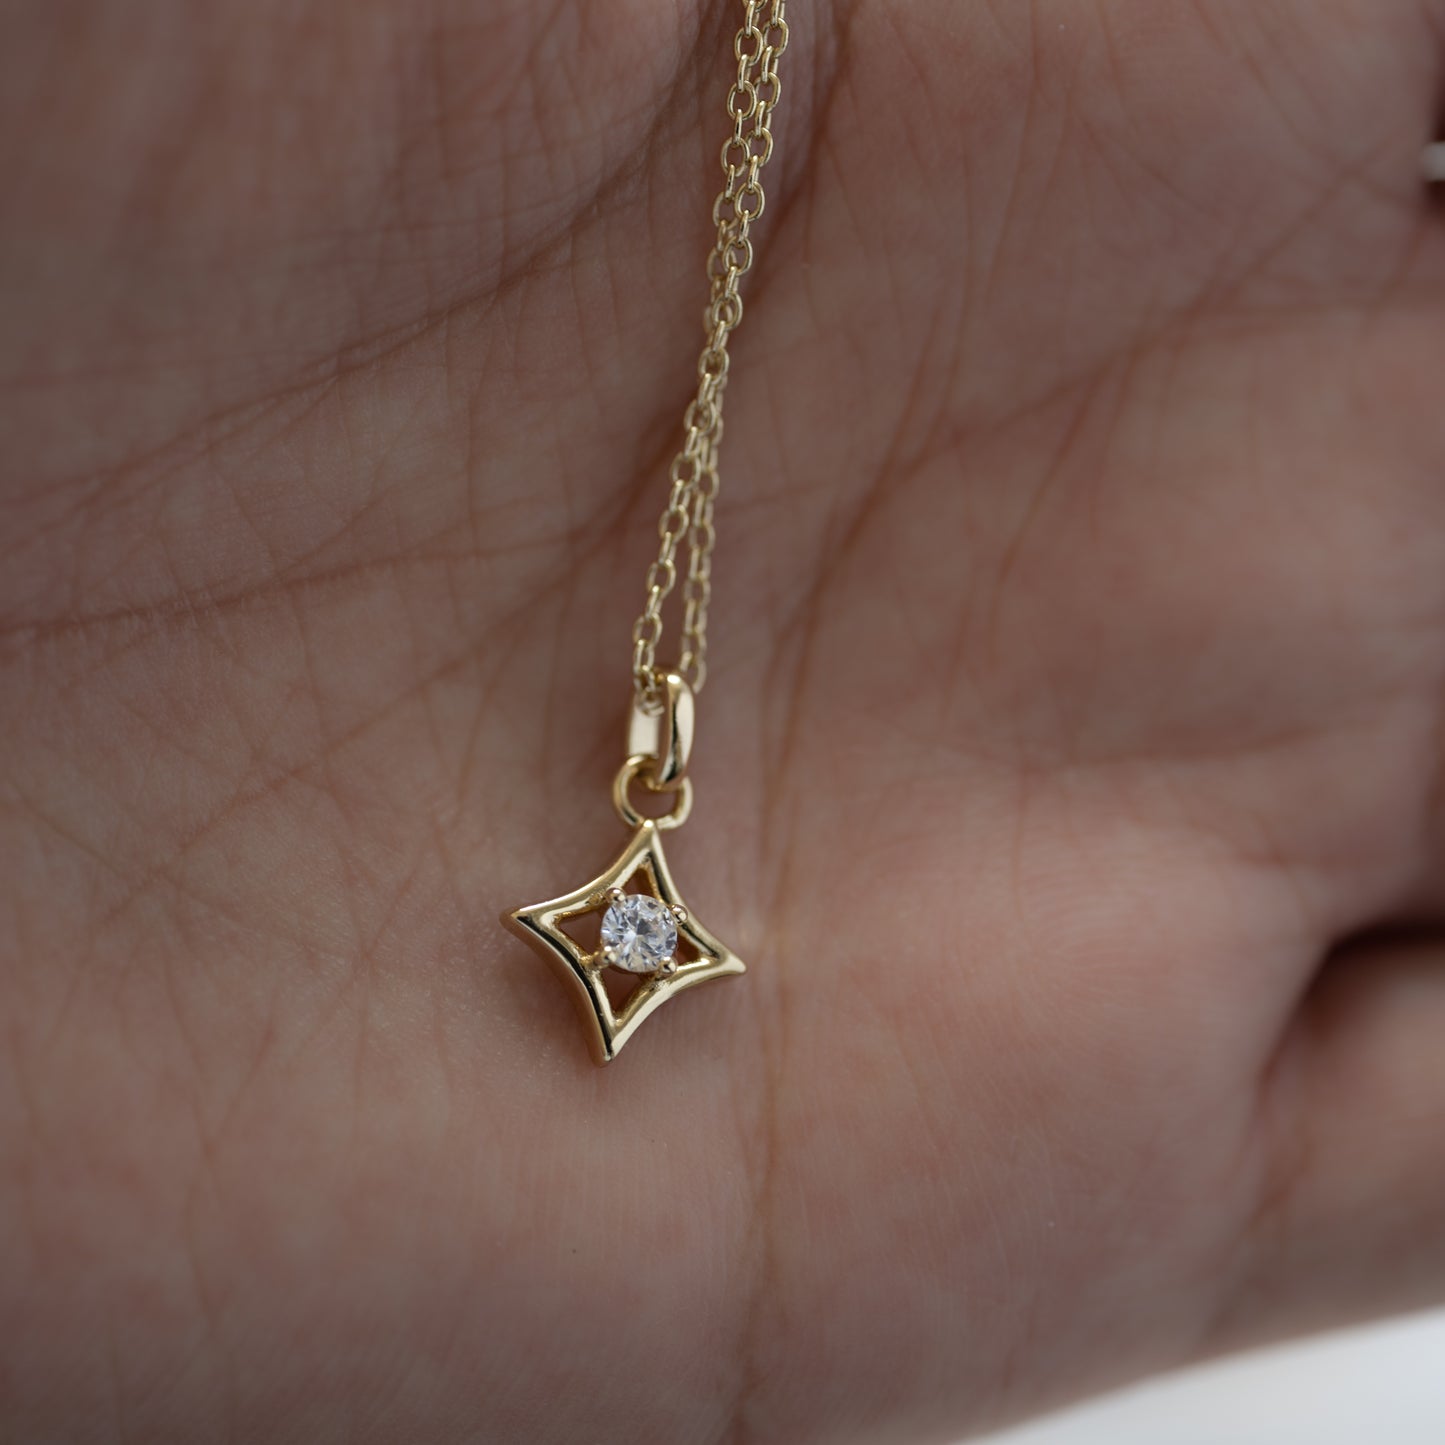 A hand showcasing a gold layering necklace with diamond shaped pendant